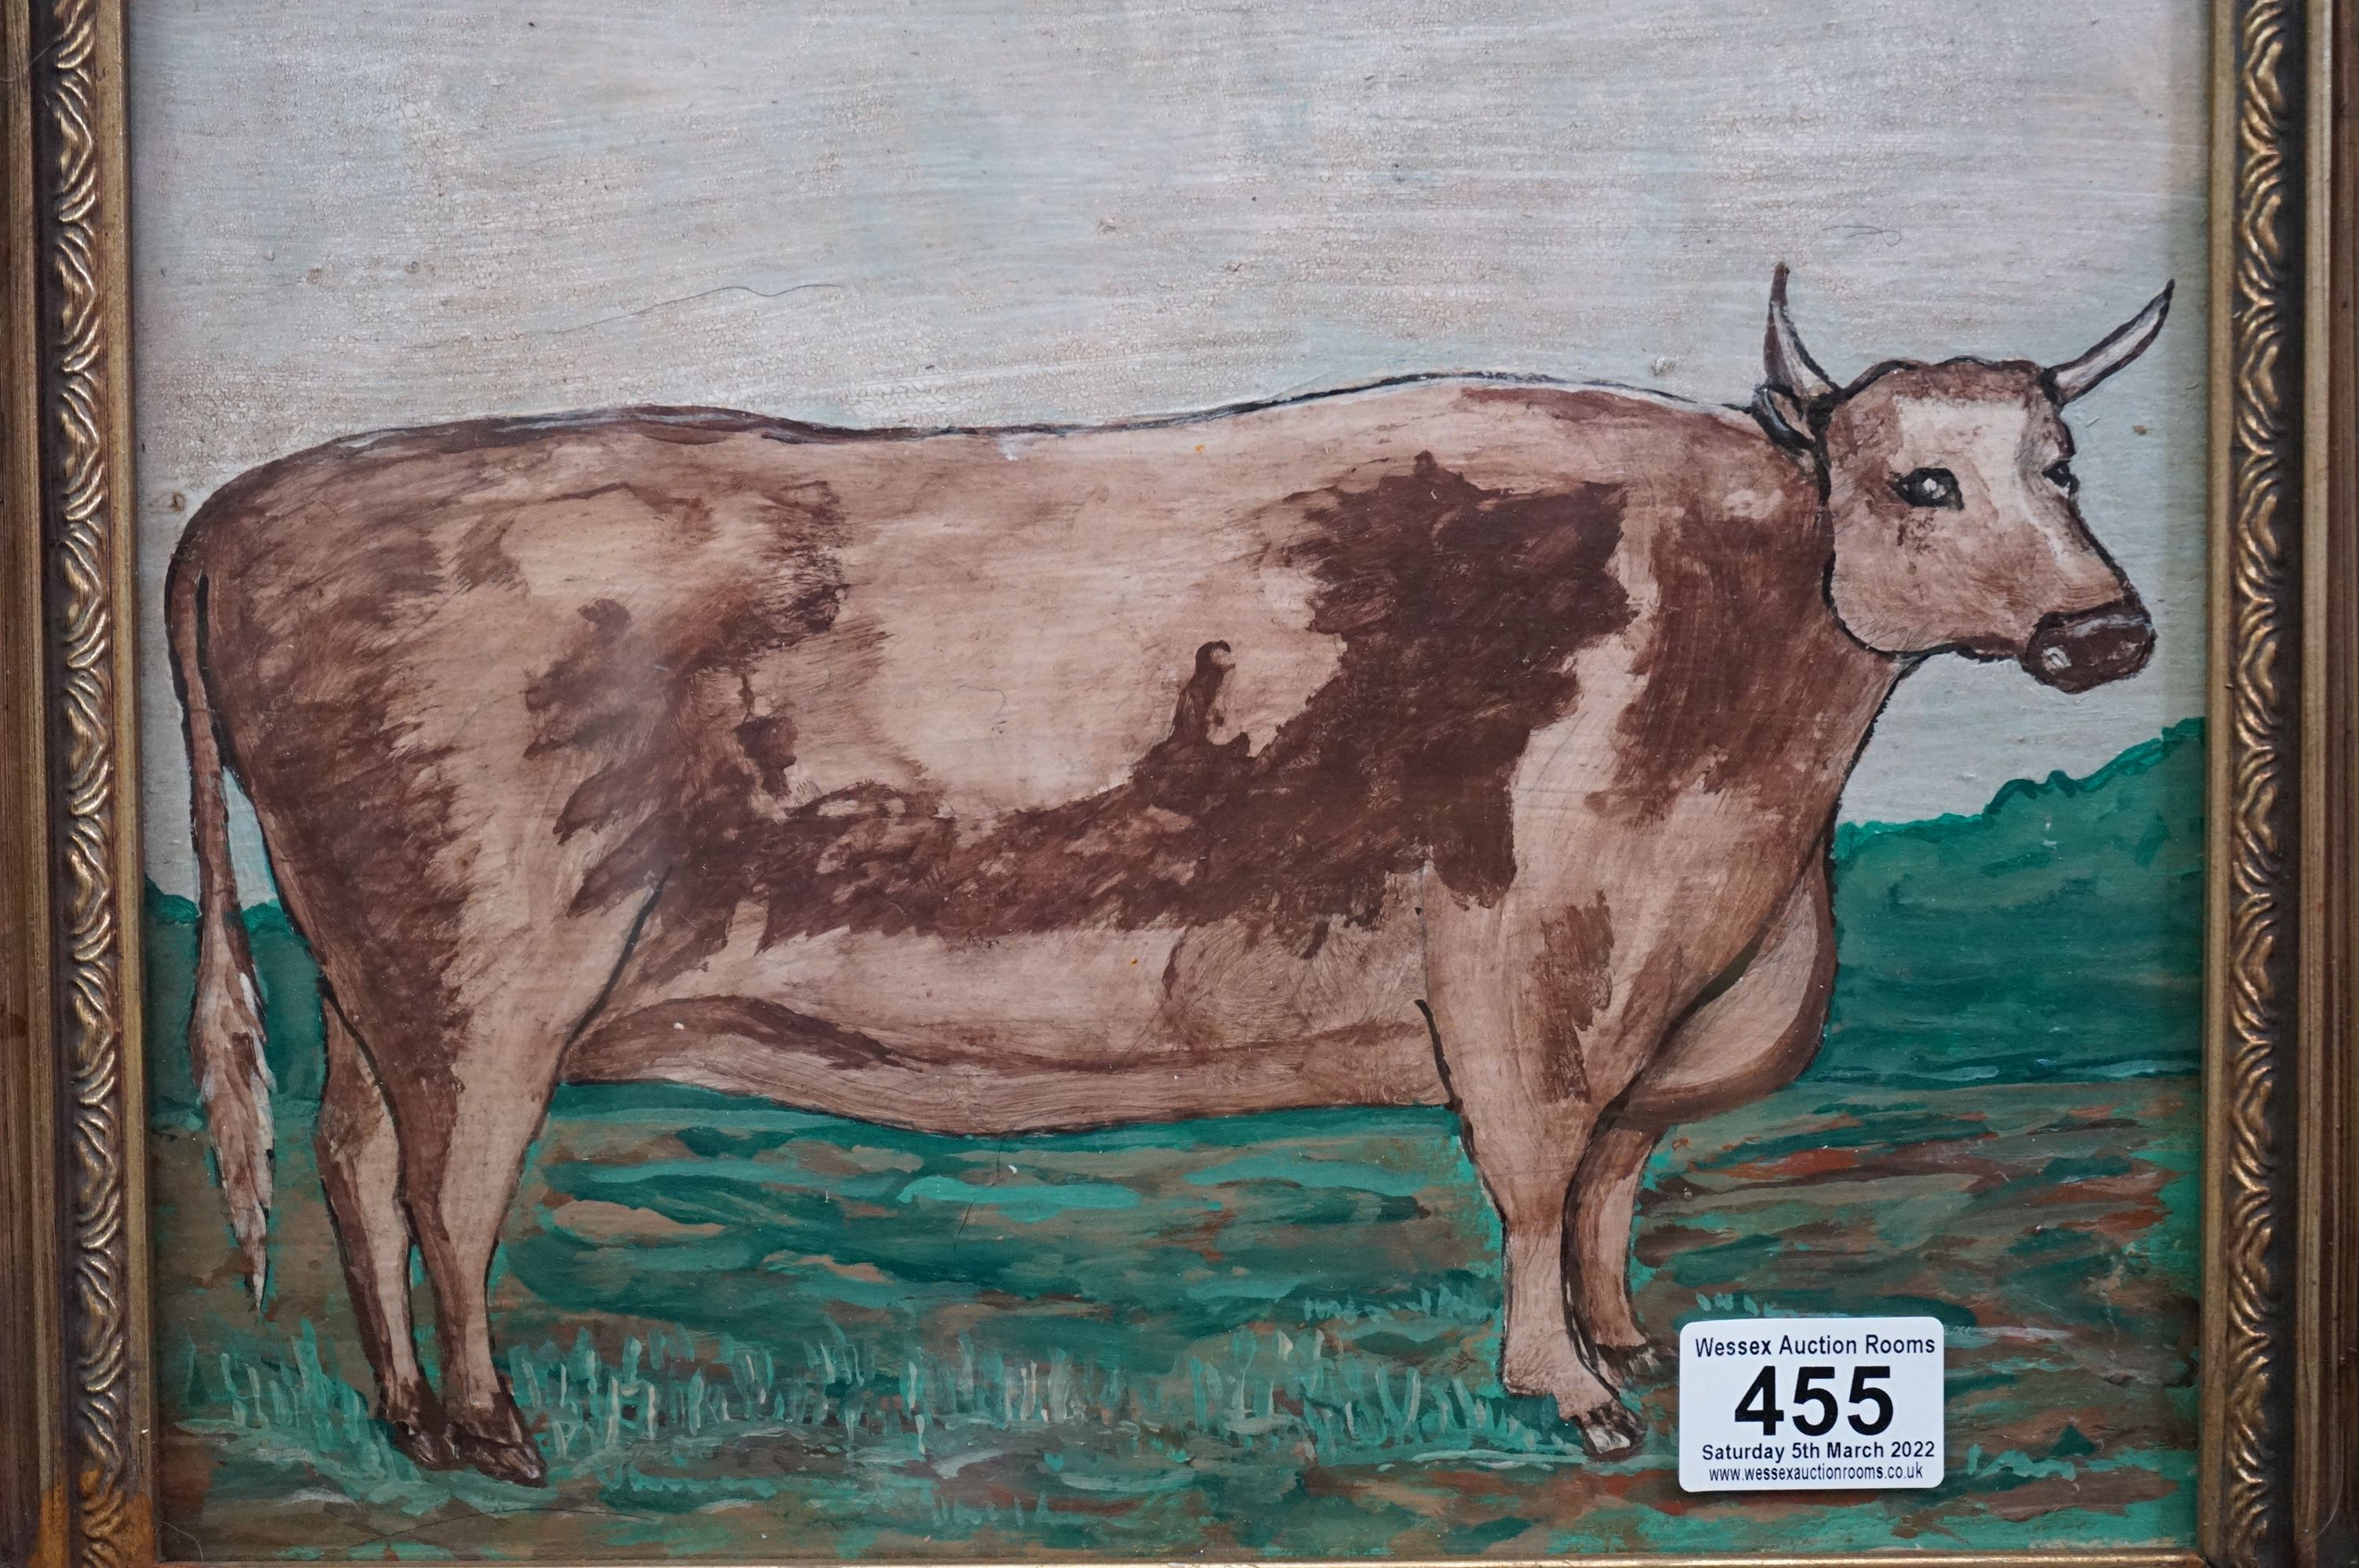 Oil painting of a bull in a landscape setting, 29cm x 24cm, framed and glazed - Image 2 of 6